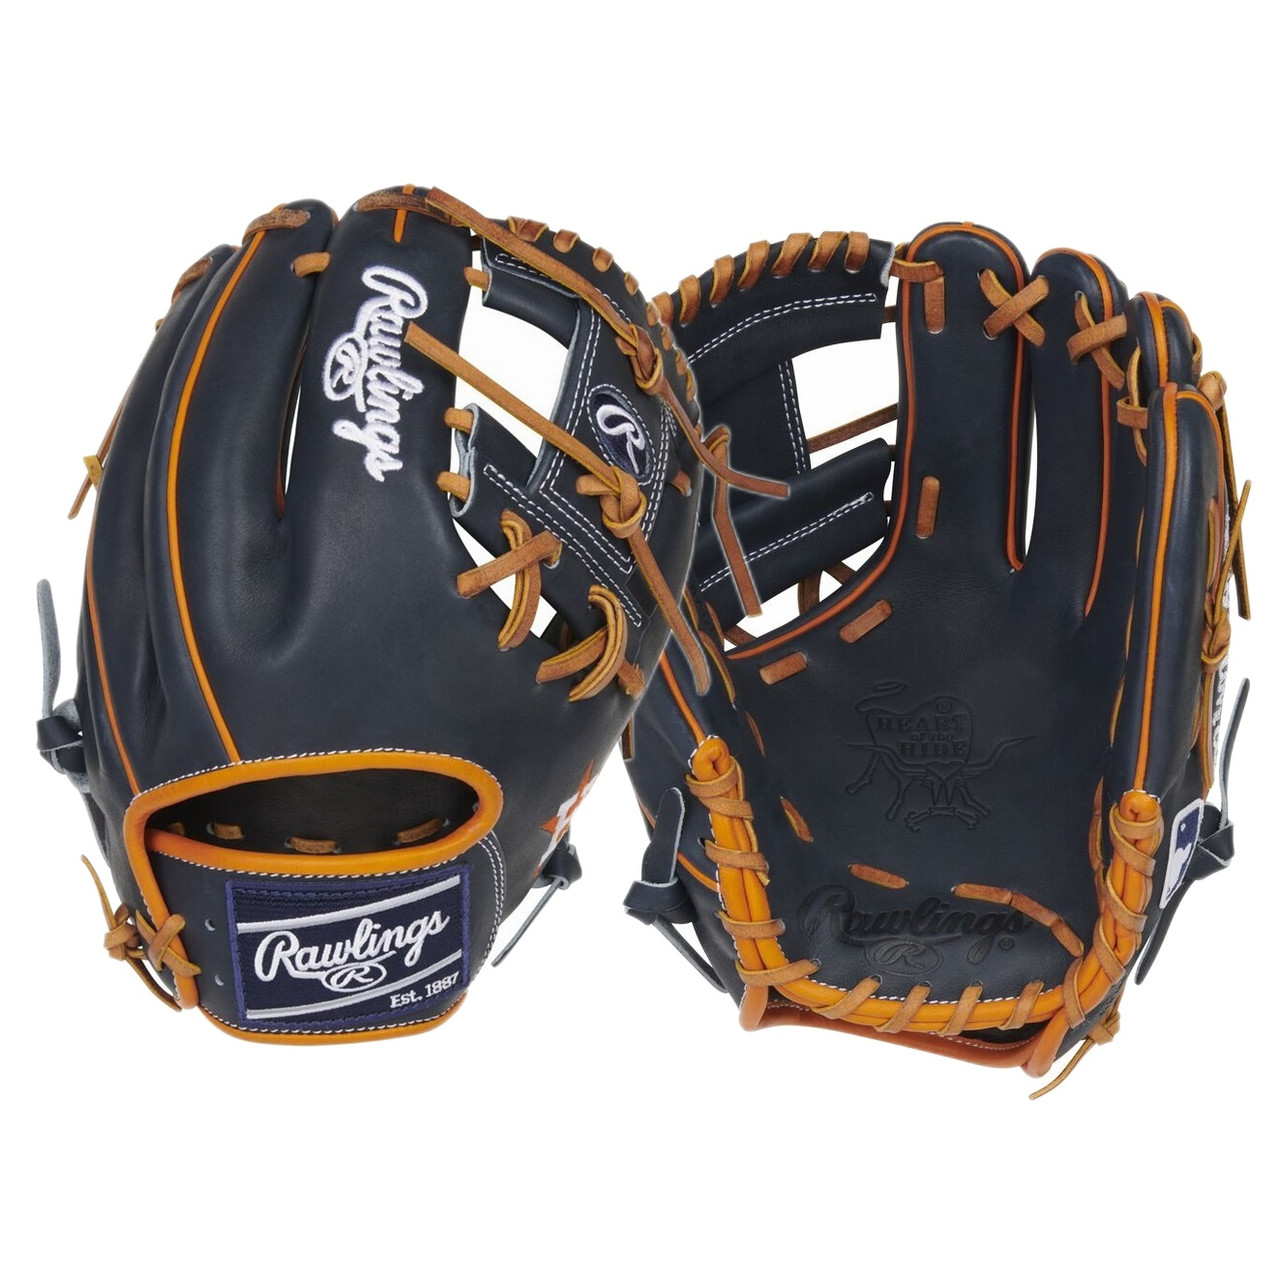 Rawlings, Houston Astros Heart of The Hide Glove, 11.5-Inch, Standard, Pro I-Web, Conventional Back, Adult, Right Handed